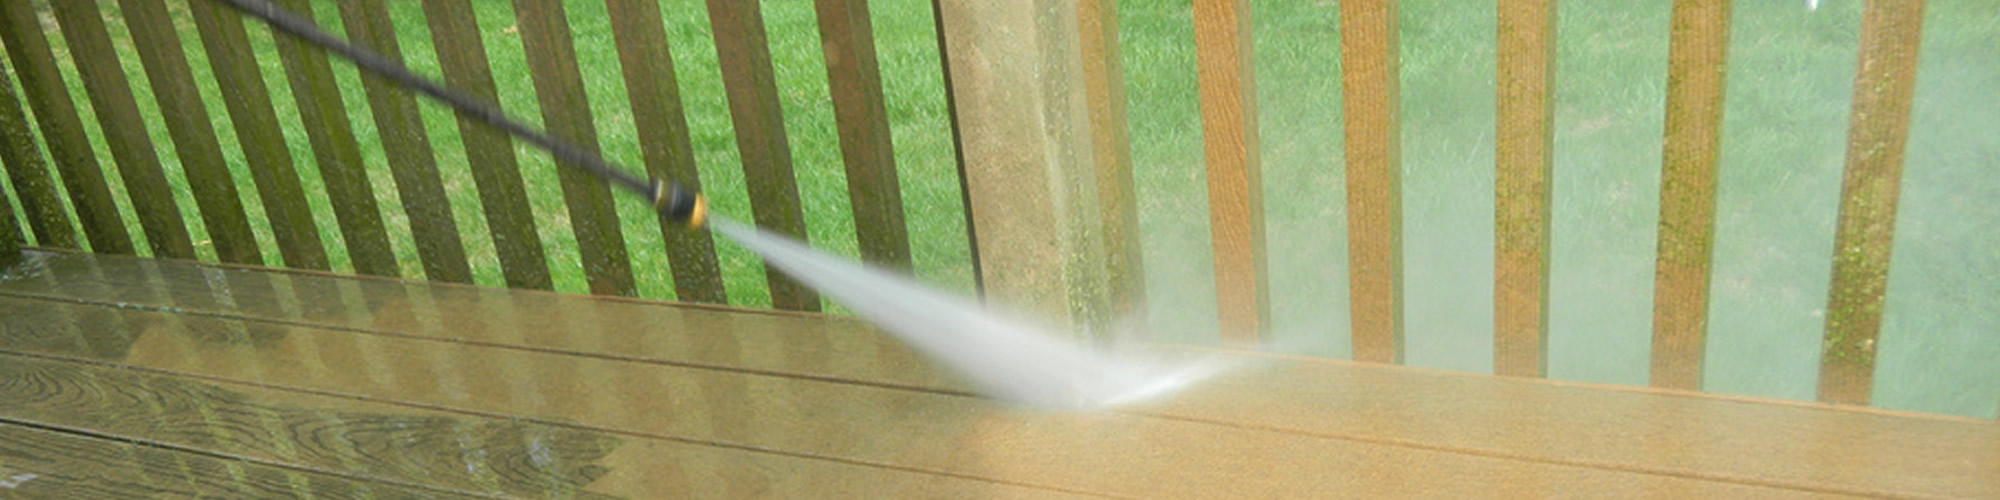 Power Washing Services Muskego Wisconsin